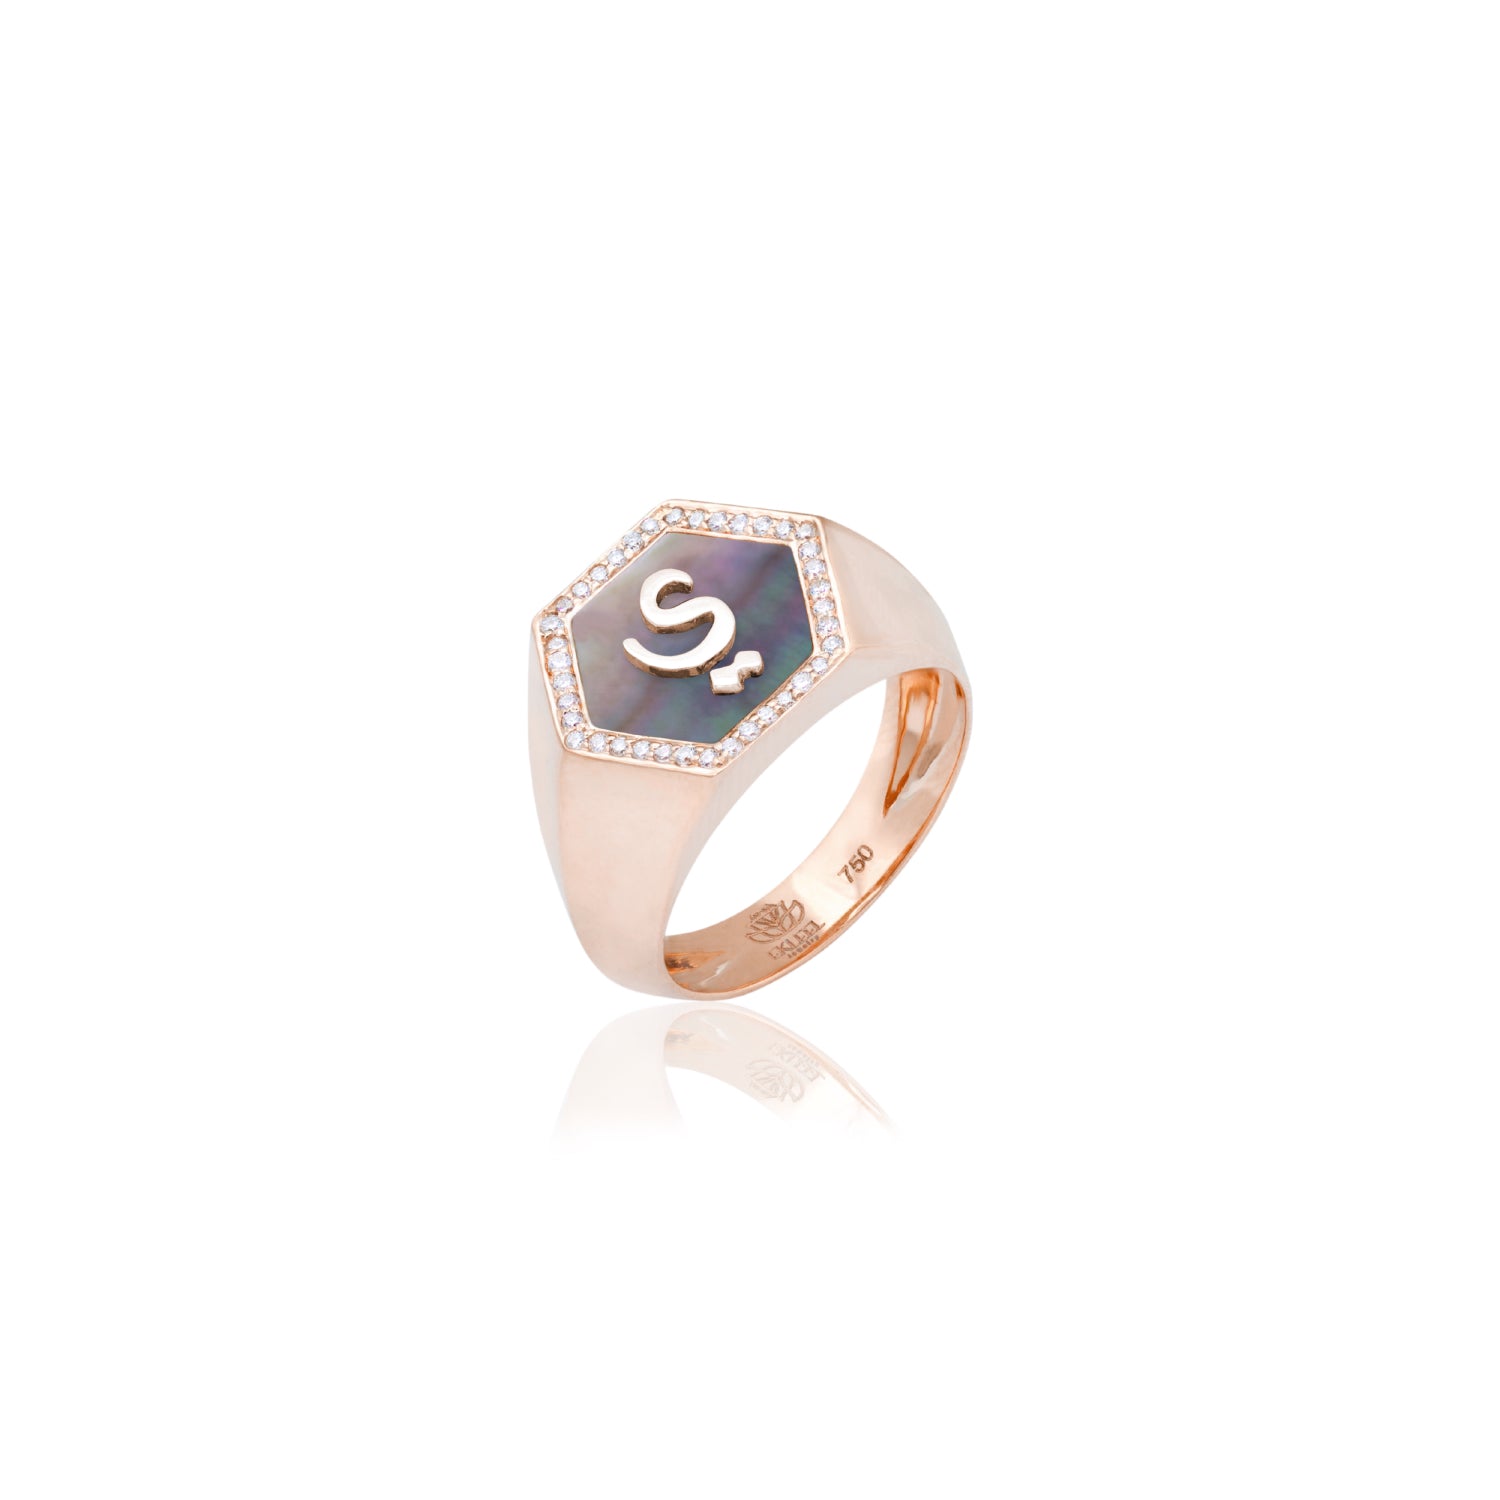 Qamoos 2.0 Letter ي Black Mother of Pearl and Diamond Signet Ring in Rose Gold